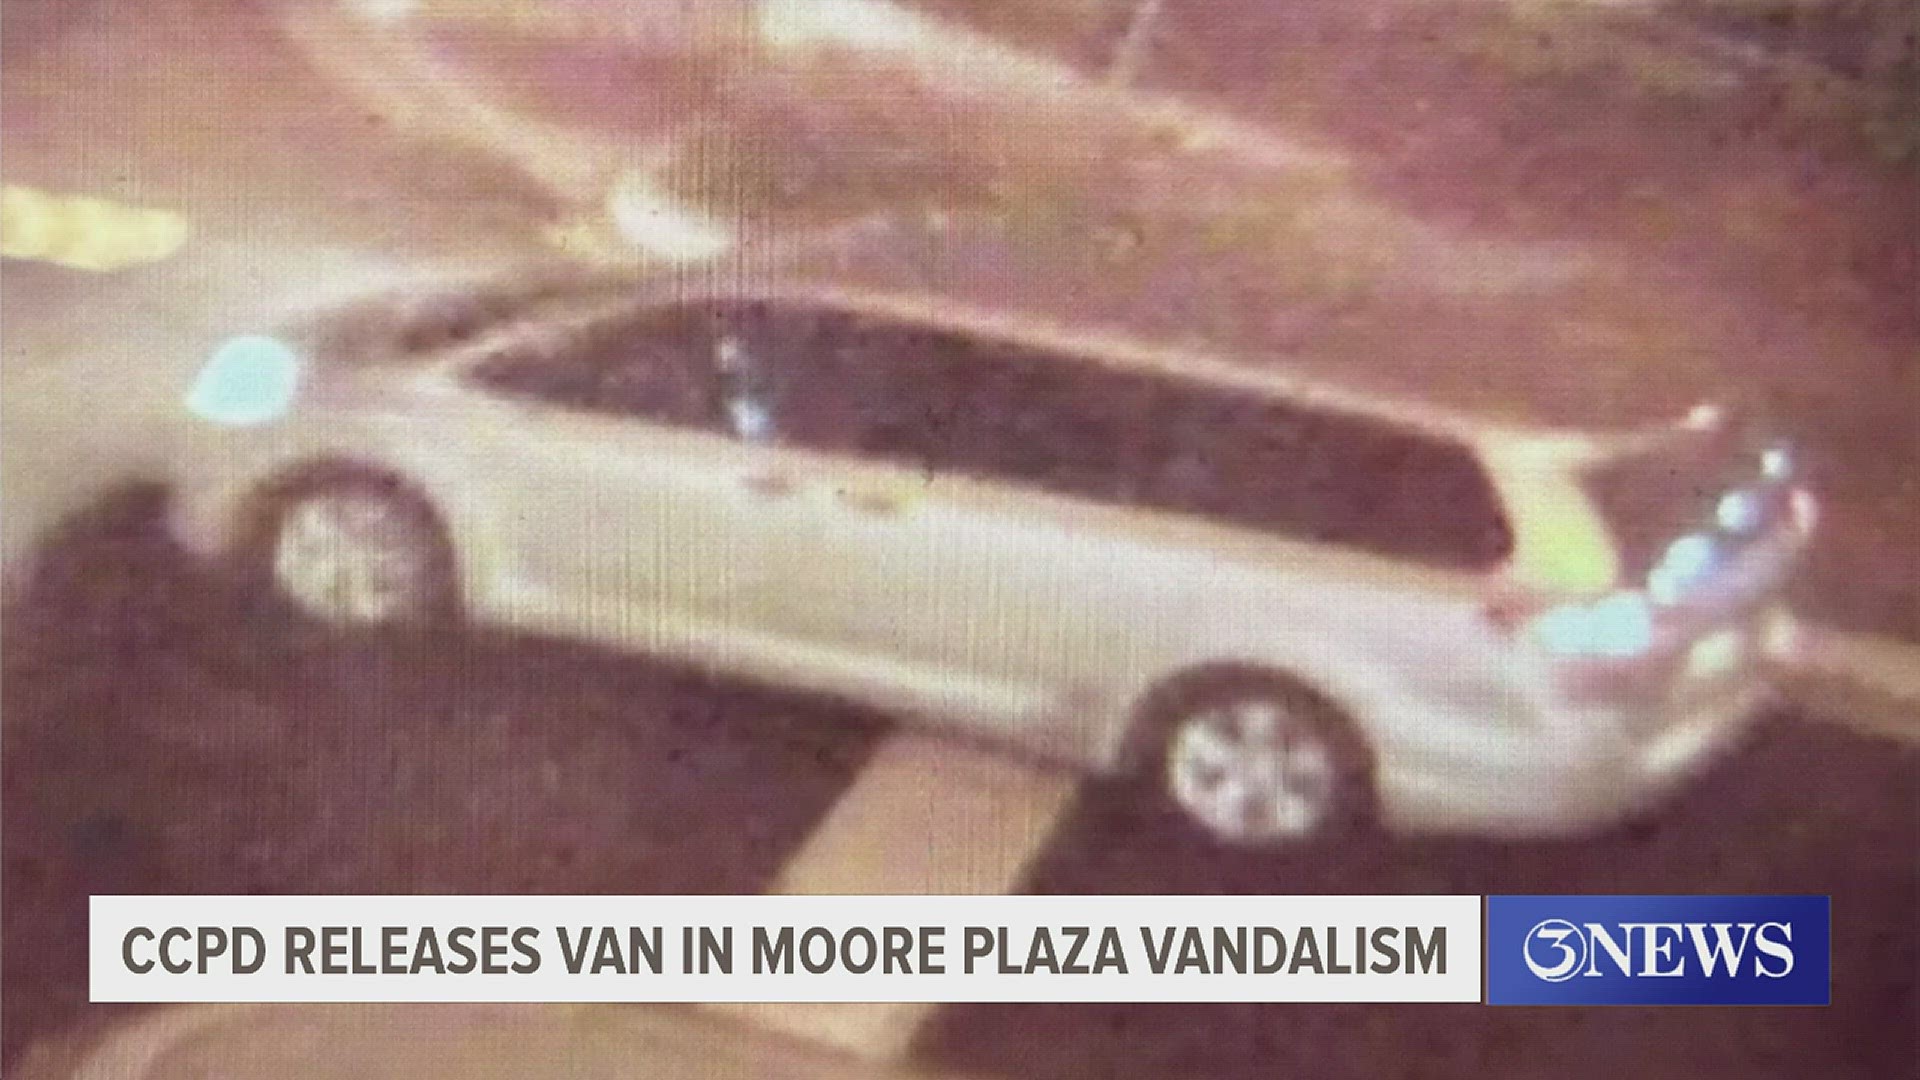 Police say 15 police reports have been filed against the suspect or suspects in the van, as they have damaged several business' front windows.